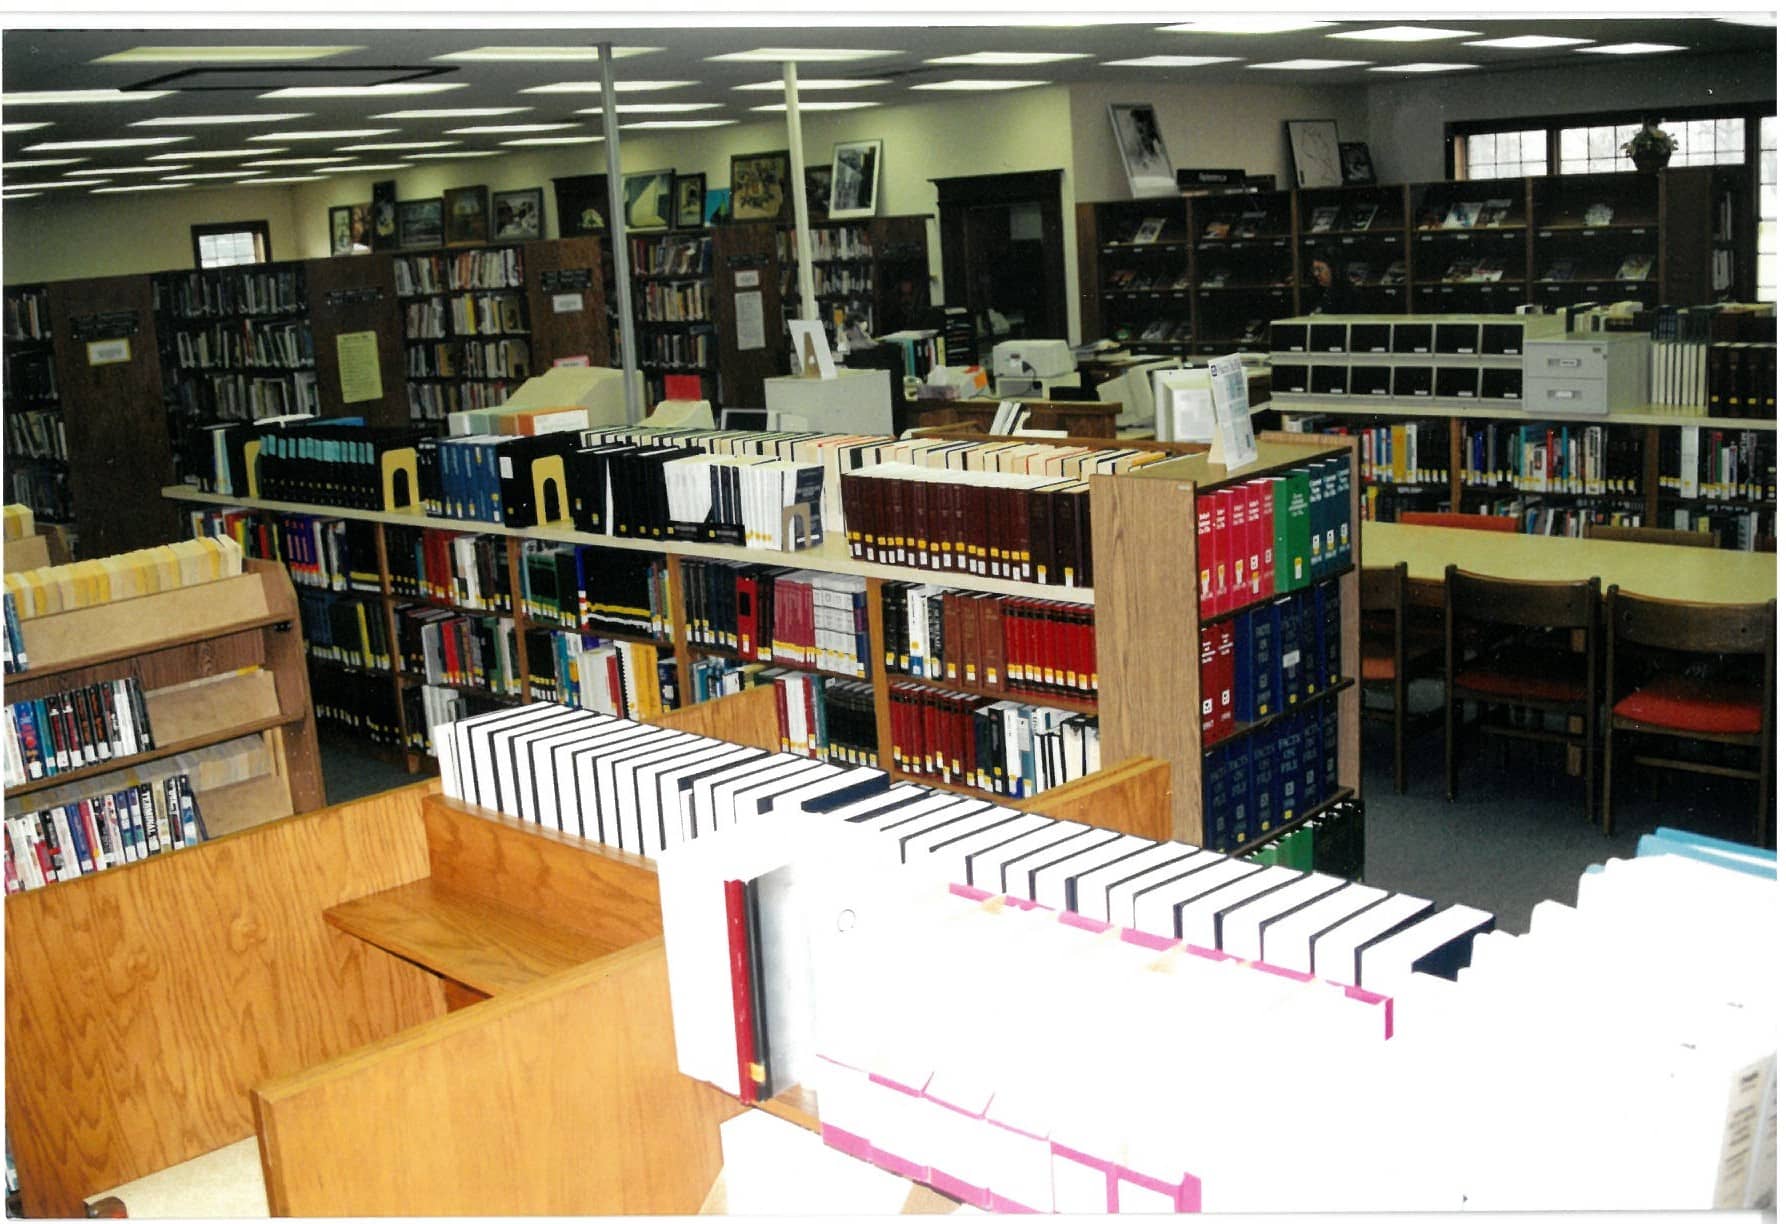 PCDL Reference Department books on shelves and computers